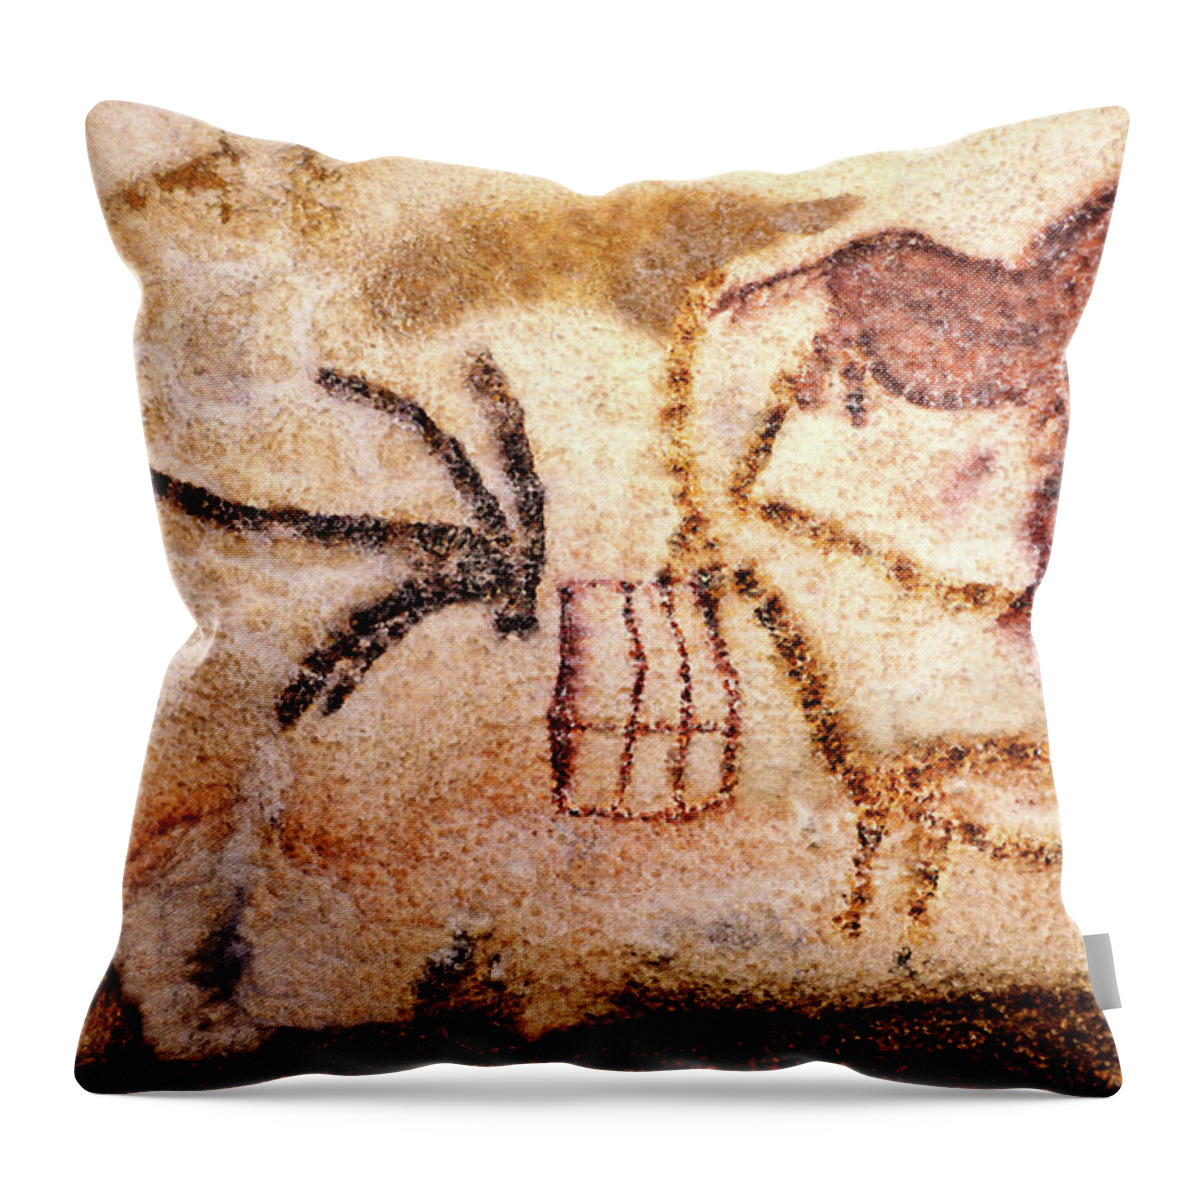 Lascaux Throw Pillow featuring the digital art Lascaux - Two Ibex by Weston Westmoreland